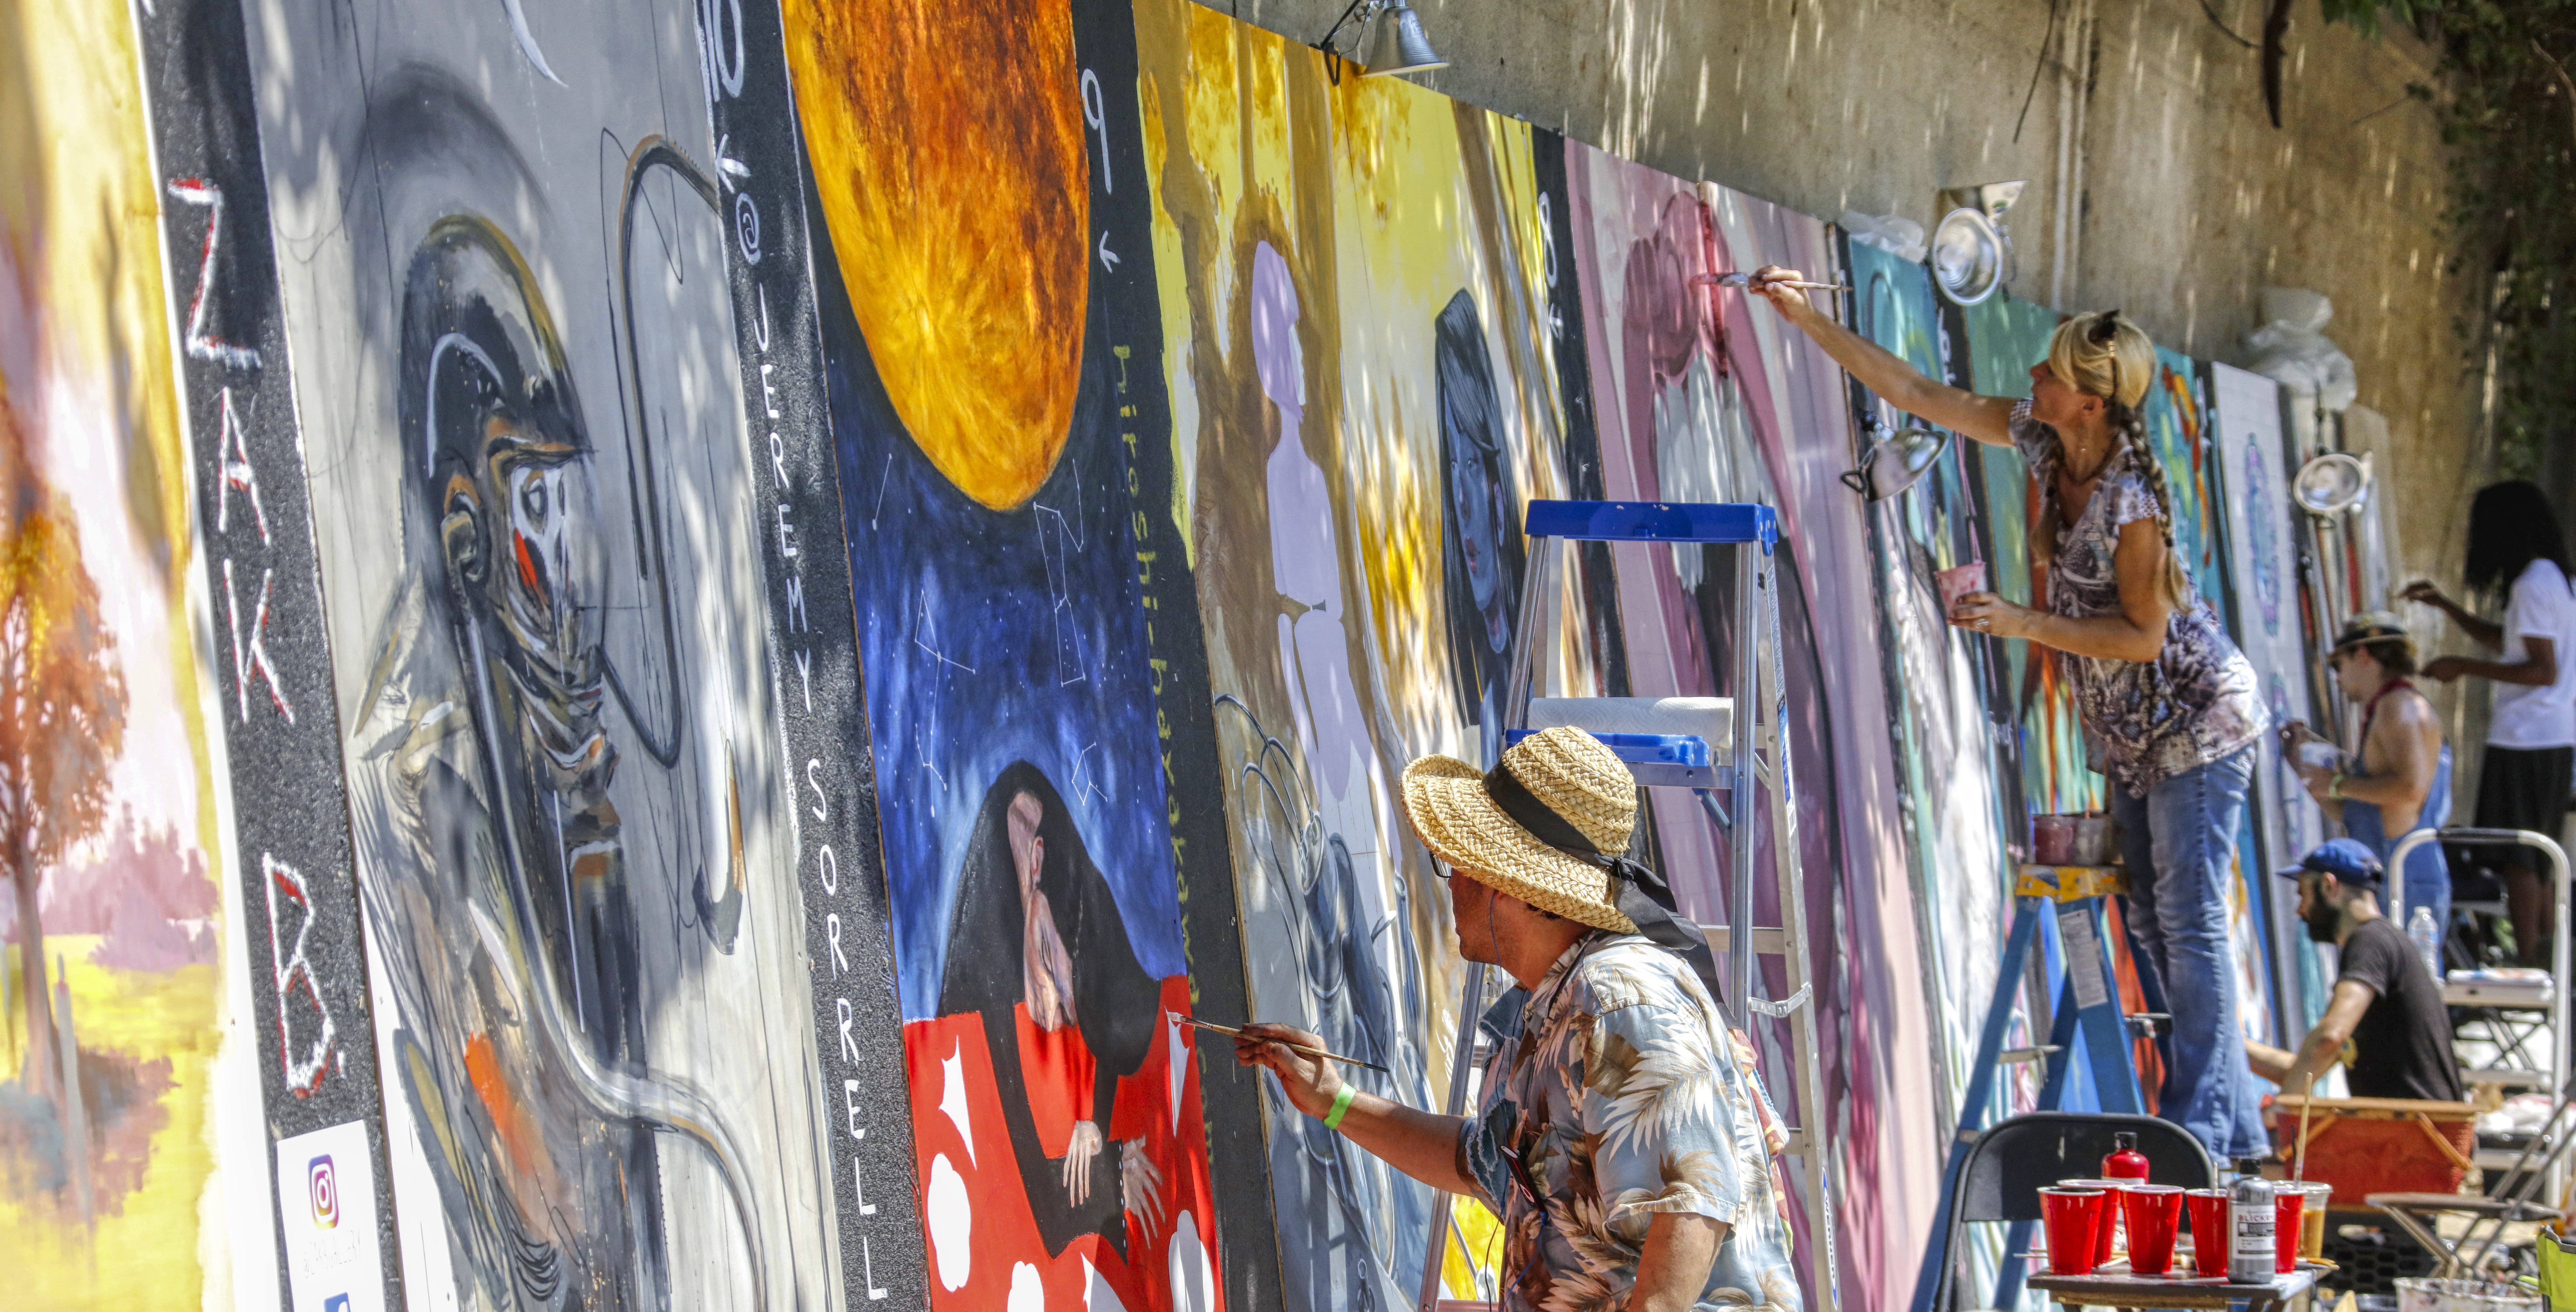 Live mural painters with vibrant artwork at Urban Scrawl in Franklinton